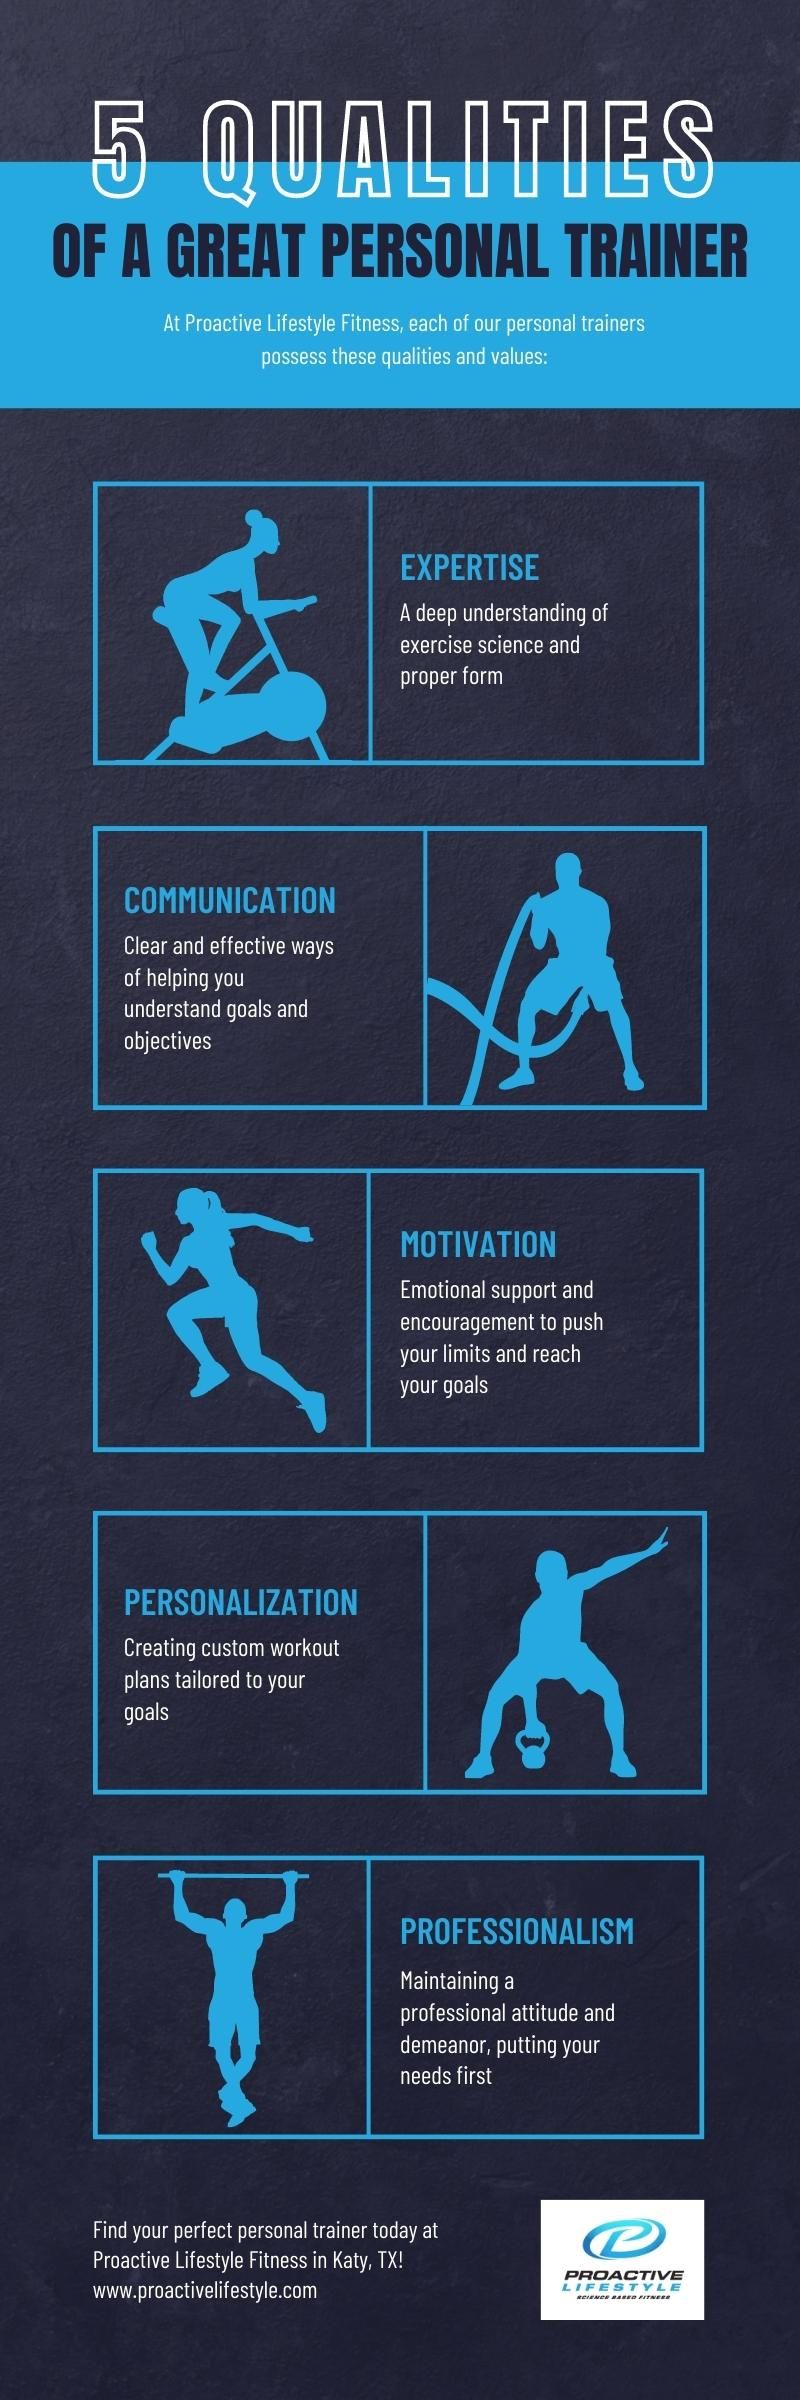 5 Qualities of a Great Personal Trainer Infographic.jpg